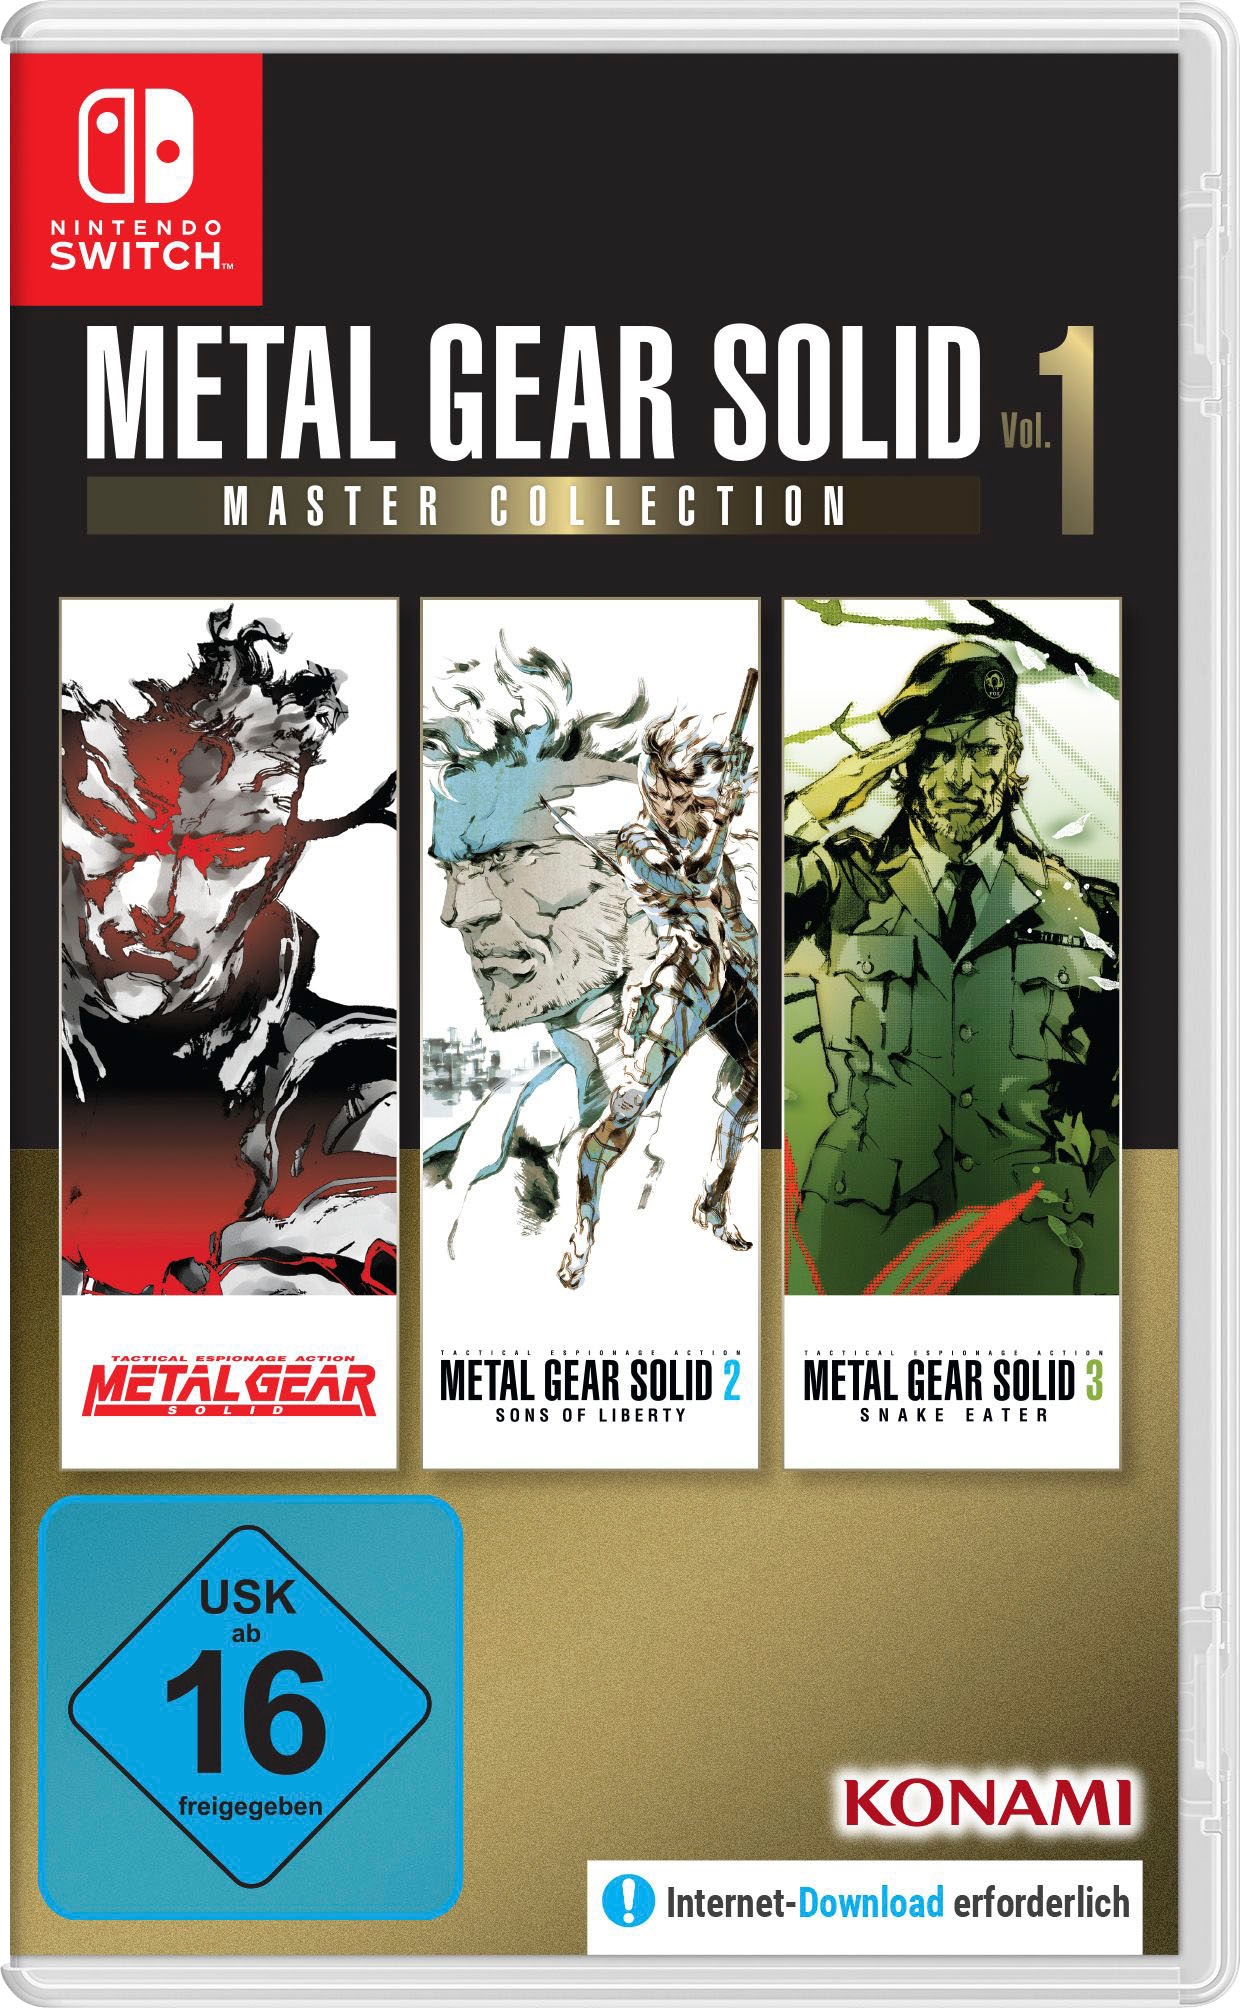 Spielesoftware »Metal Gear Solid Master Collection Vol. 1«, Nintendo Switch